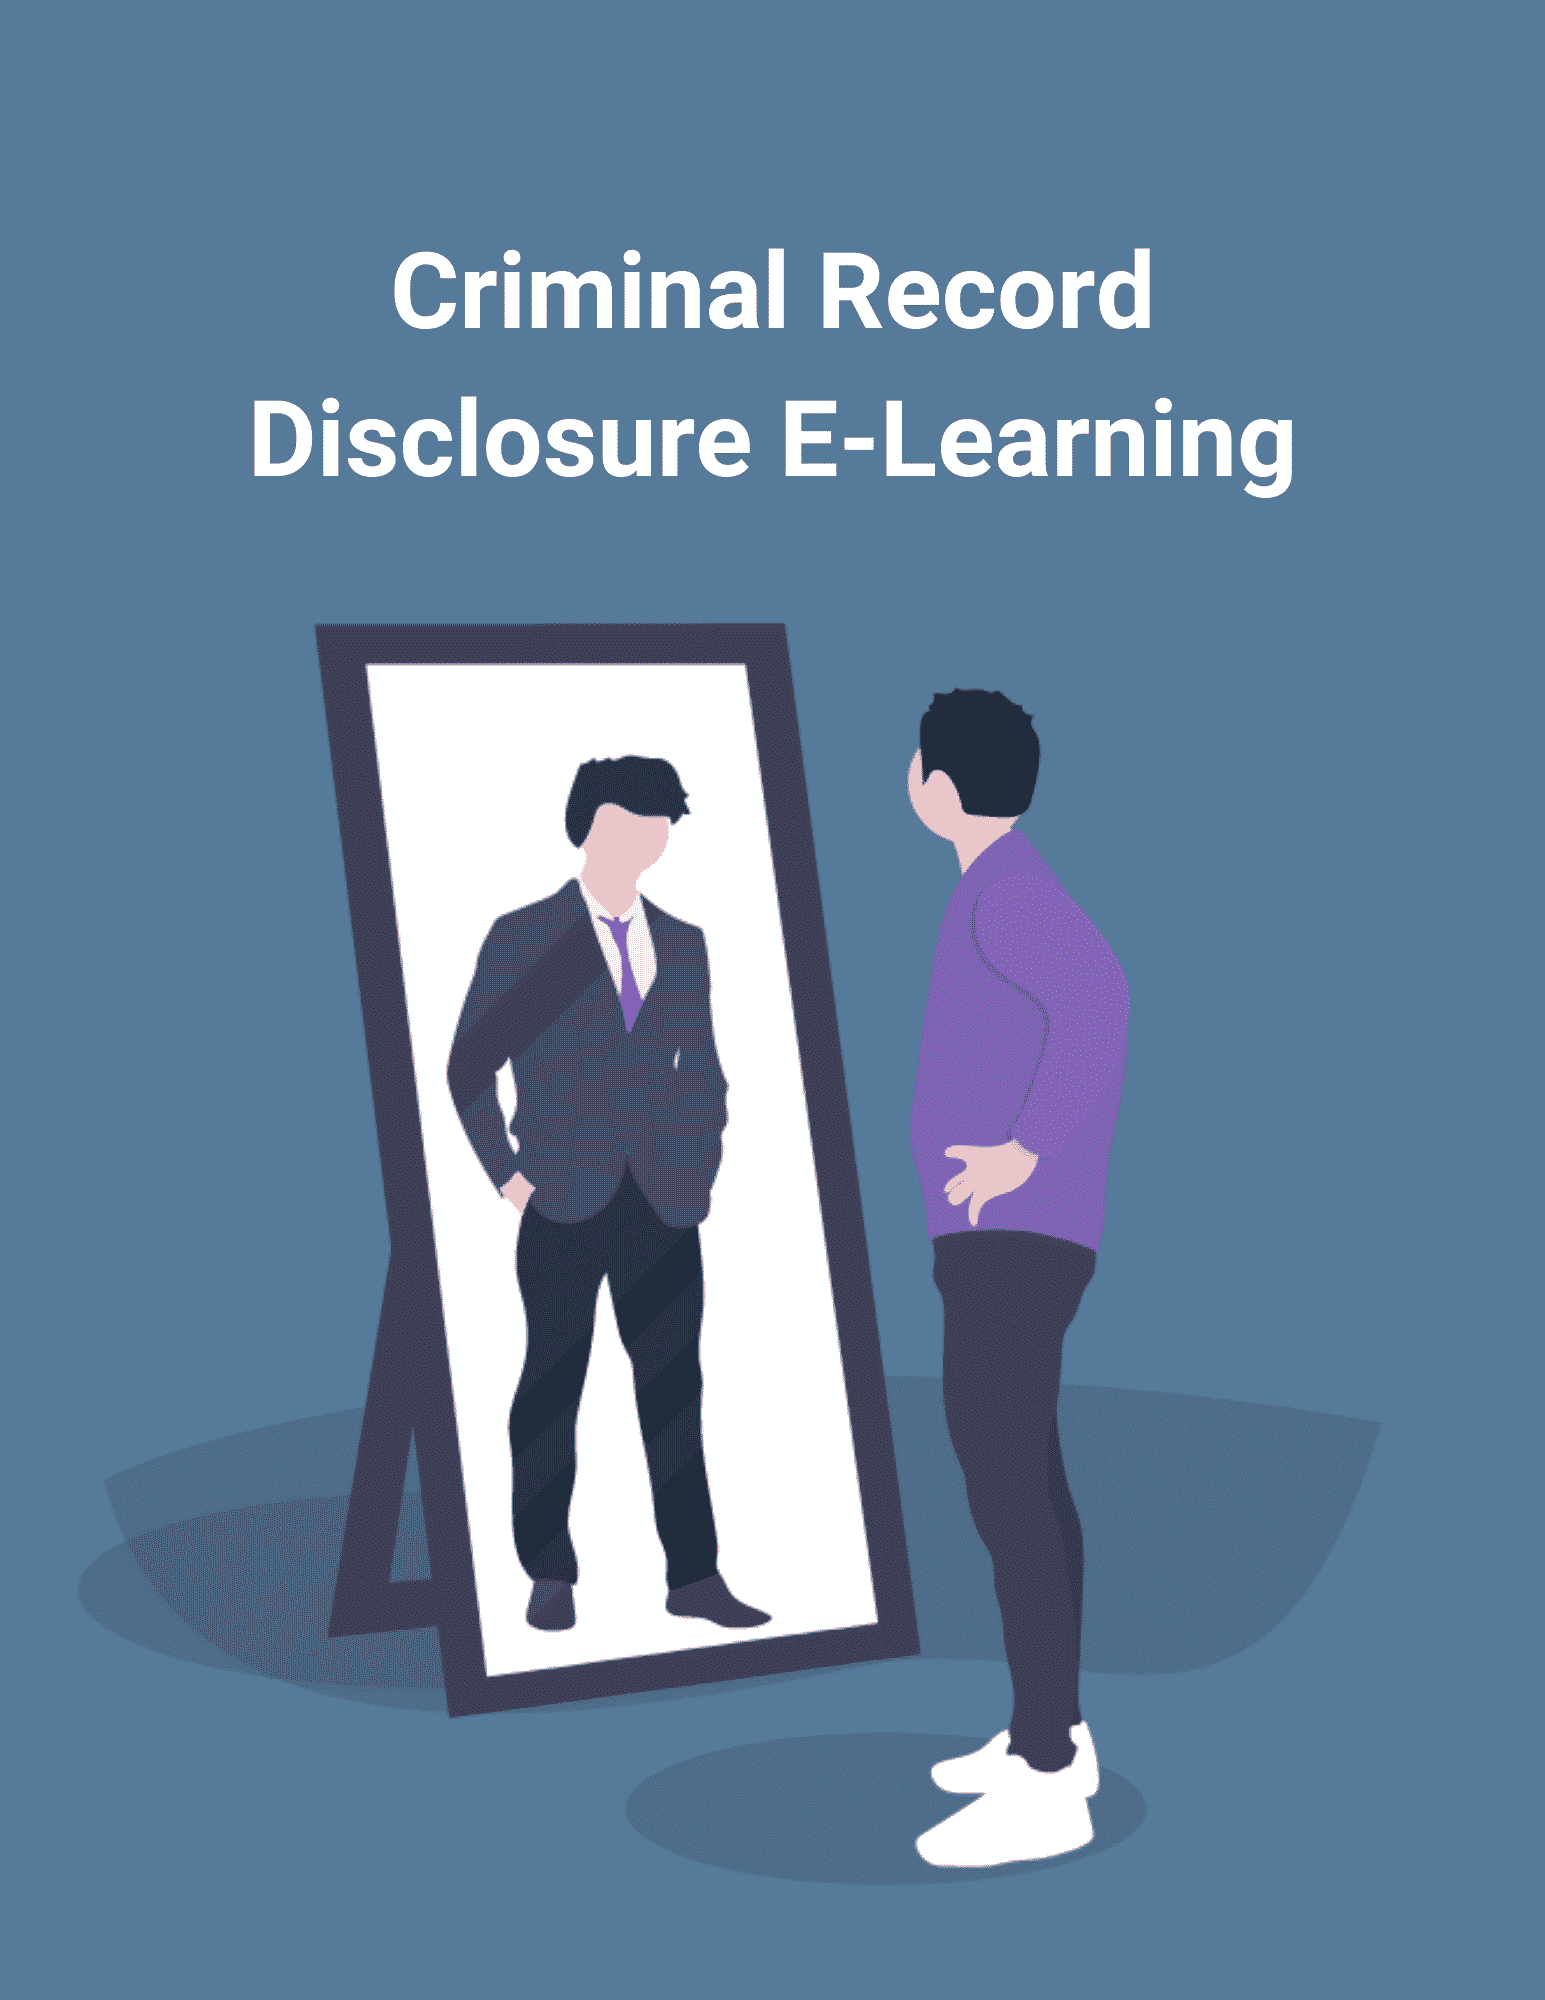 Cover of Criminal record disclosure E-Learning with a man looking into the mirror and seeing a version of himself in a suit.